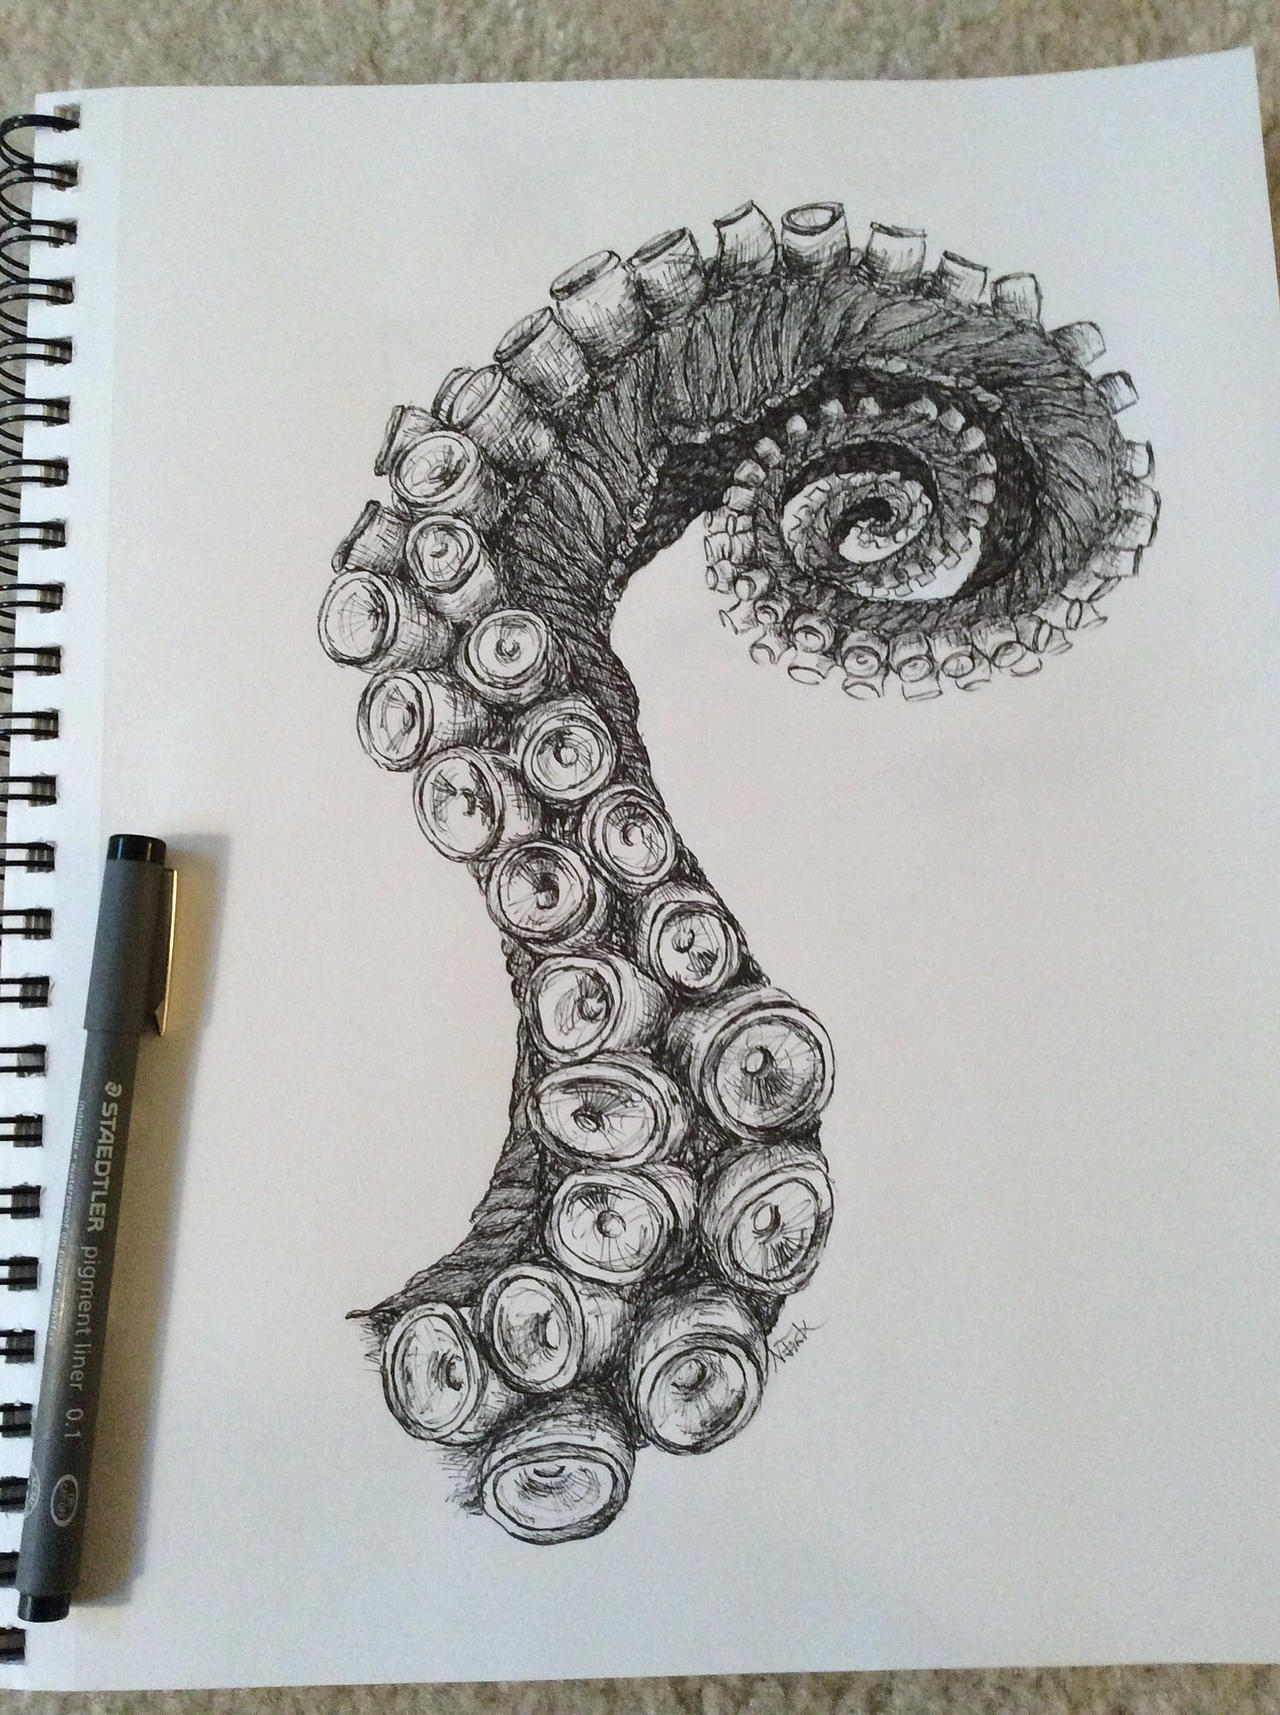 Octopus Tentacle by Ismey-the-Nimble on DeviantArt